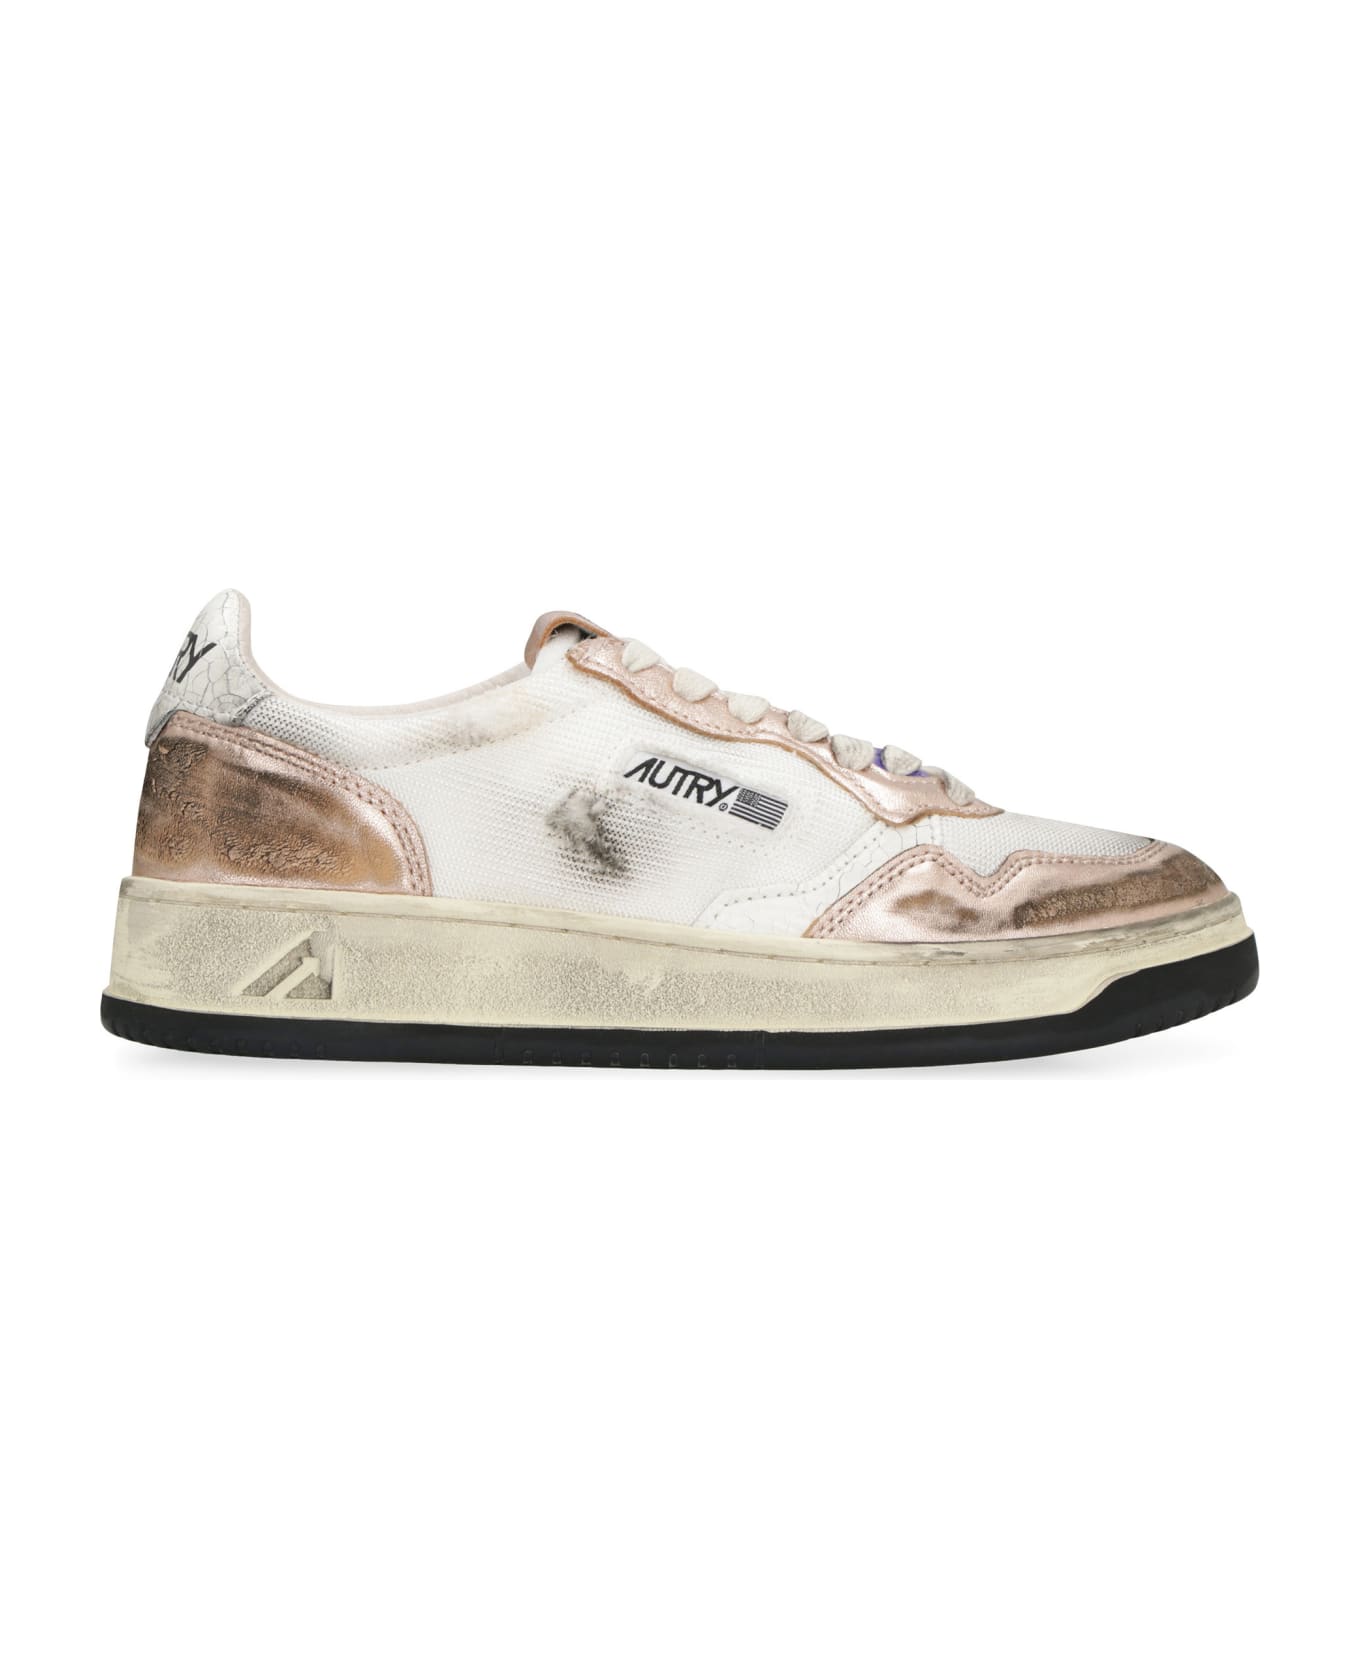 Autry Super Vintage Medalist Low Sneakers In White And Gold Leather - Bronze スニーカー